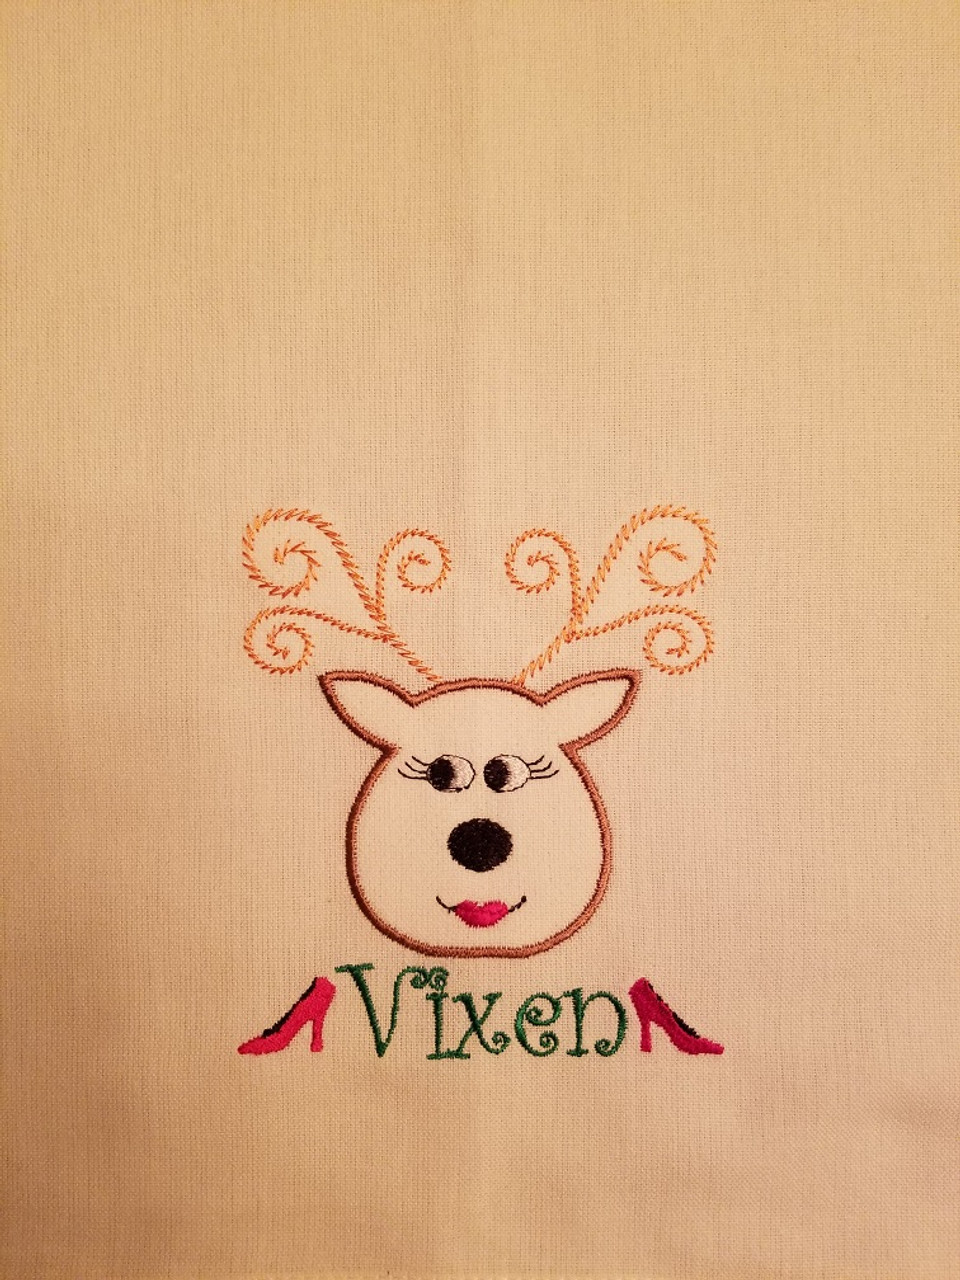 Vixen 1 - Kitchen Towel - 20" x 28"
Embroidery on a white towel.
100% Cotton with loop, for optional hanging.
Machine washable in cool water and tumble dry at low temperature.
Minimal shrinkage.
Size: 20" x 28"